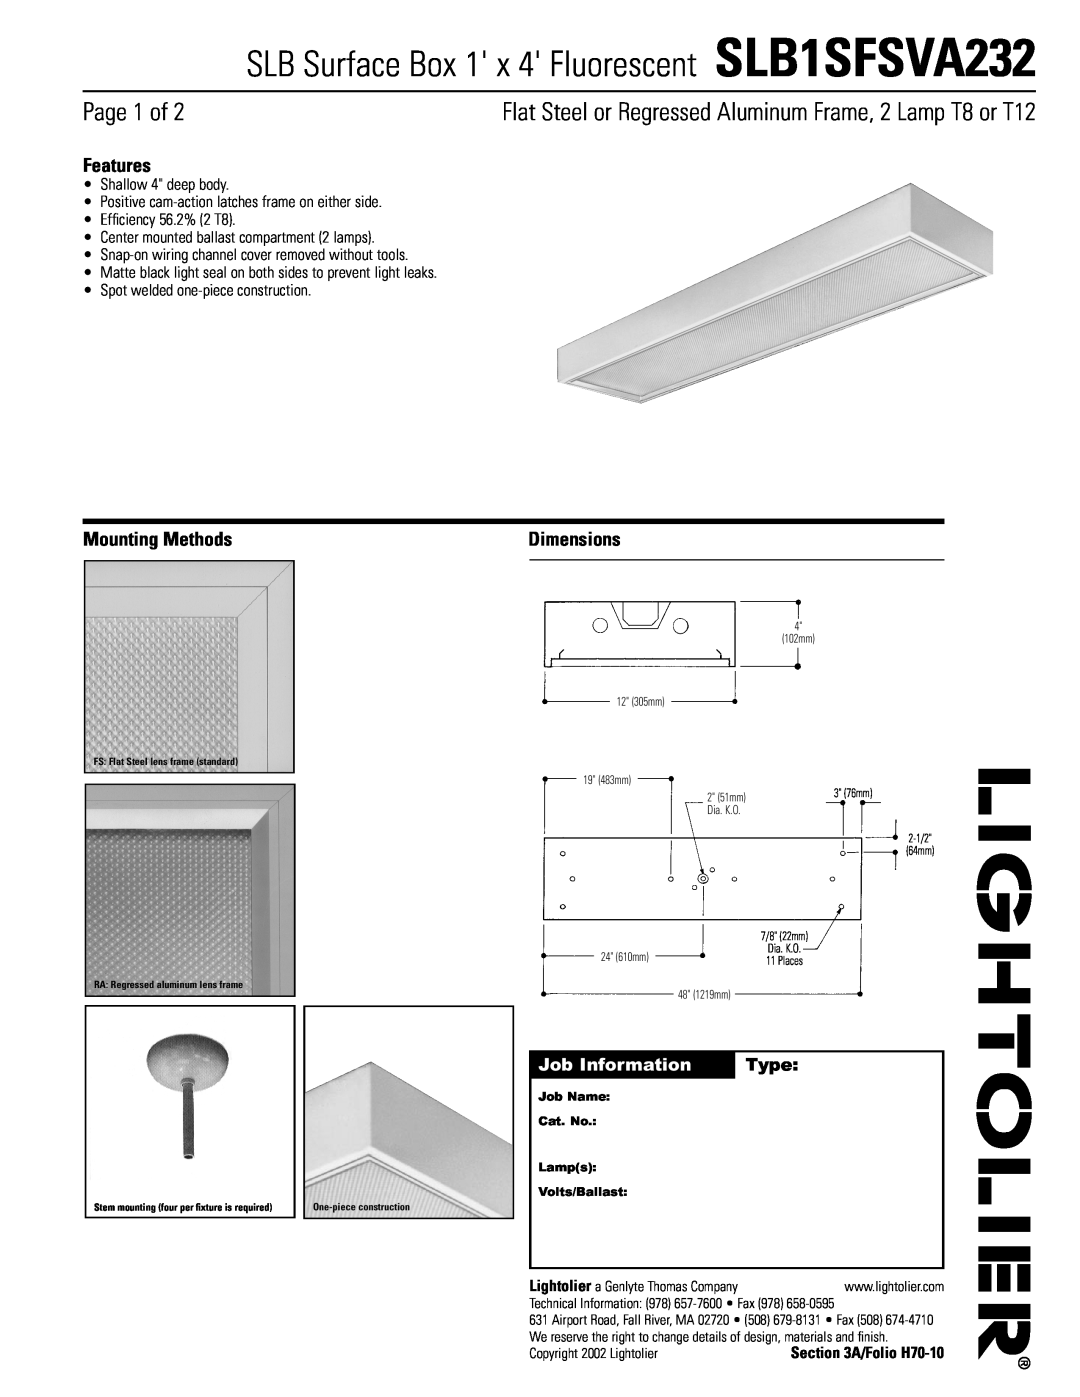 Lightolier dimensions SLB Surface Box 1 x 4 Fluorescent SLB1SFSVA232, Page 1 of, Features, Mounting Methods, Dimensions 